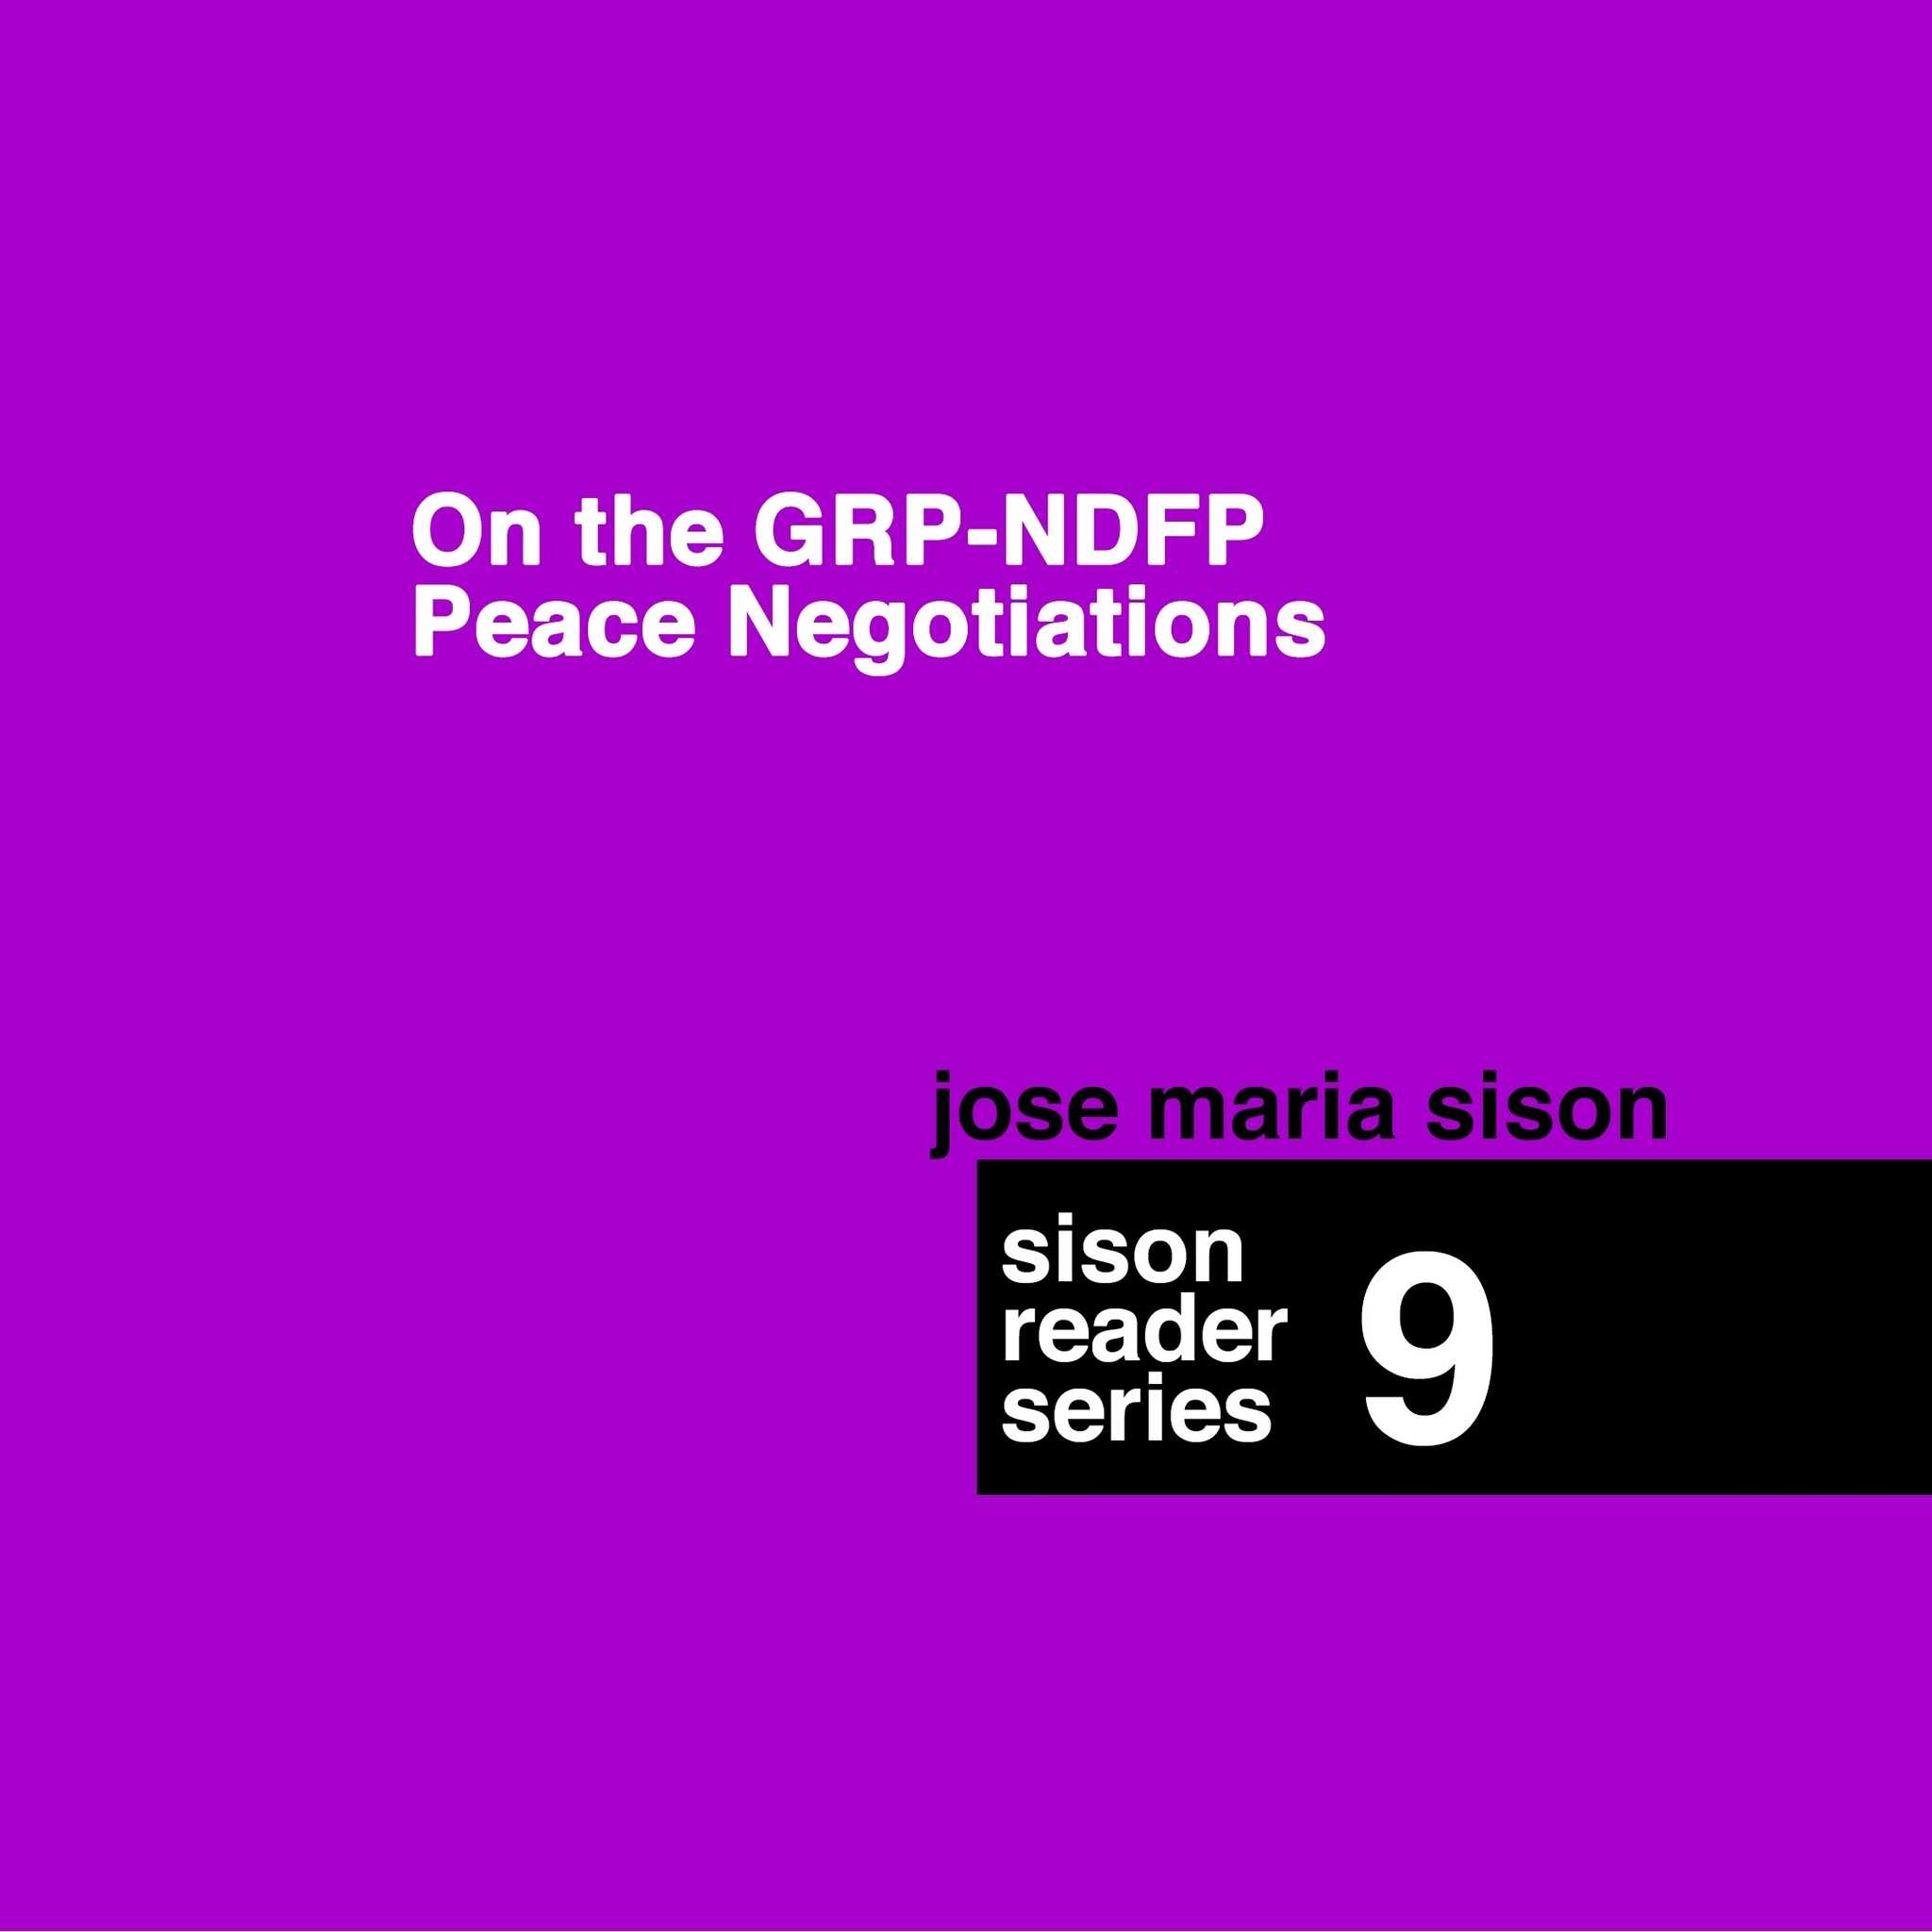 No. 9 - On the GRP-NDFP Peace Negotiations